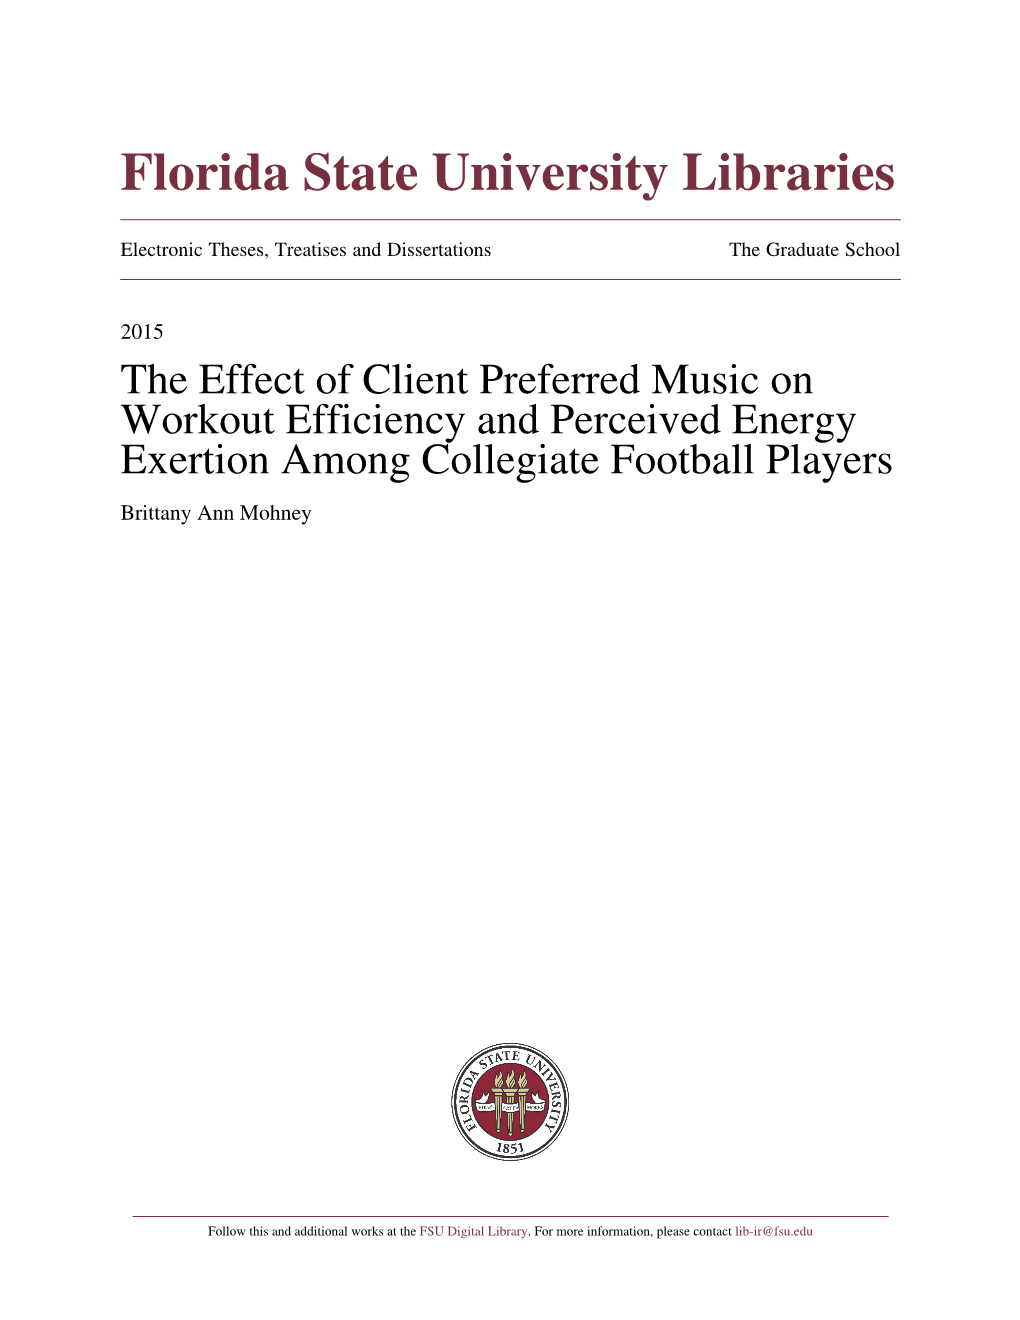 The Effect of Client Preferred Music on Workout Efficiency and Perceived Energy Exertion Among Collegiate Football Players Brittany Ann Mohney